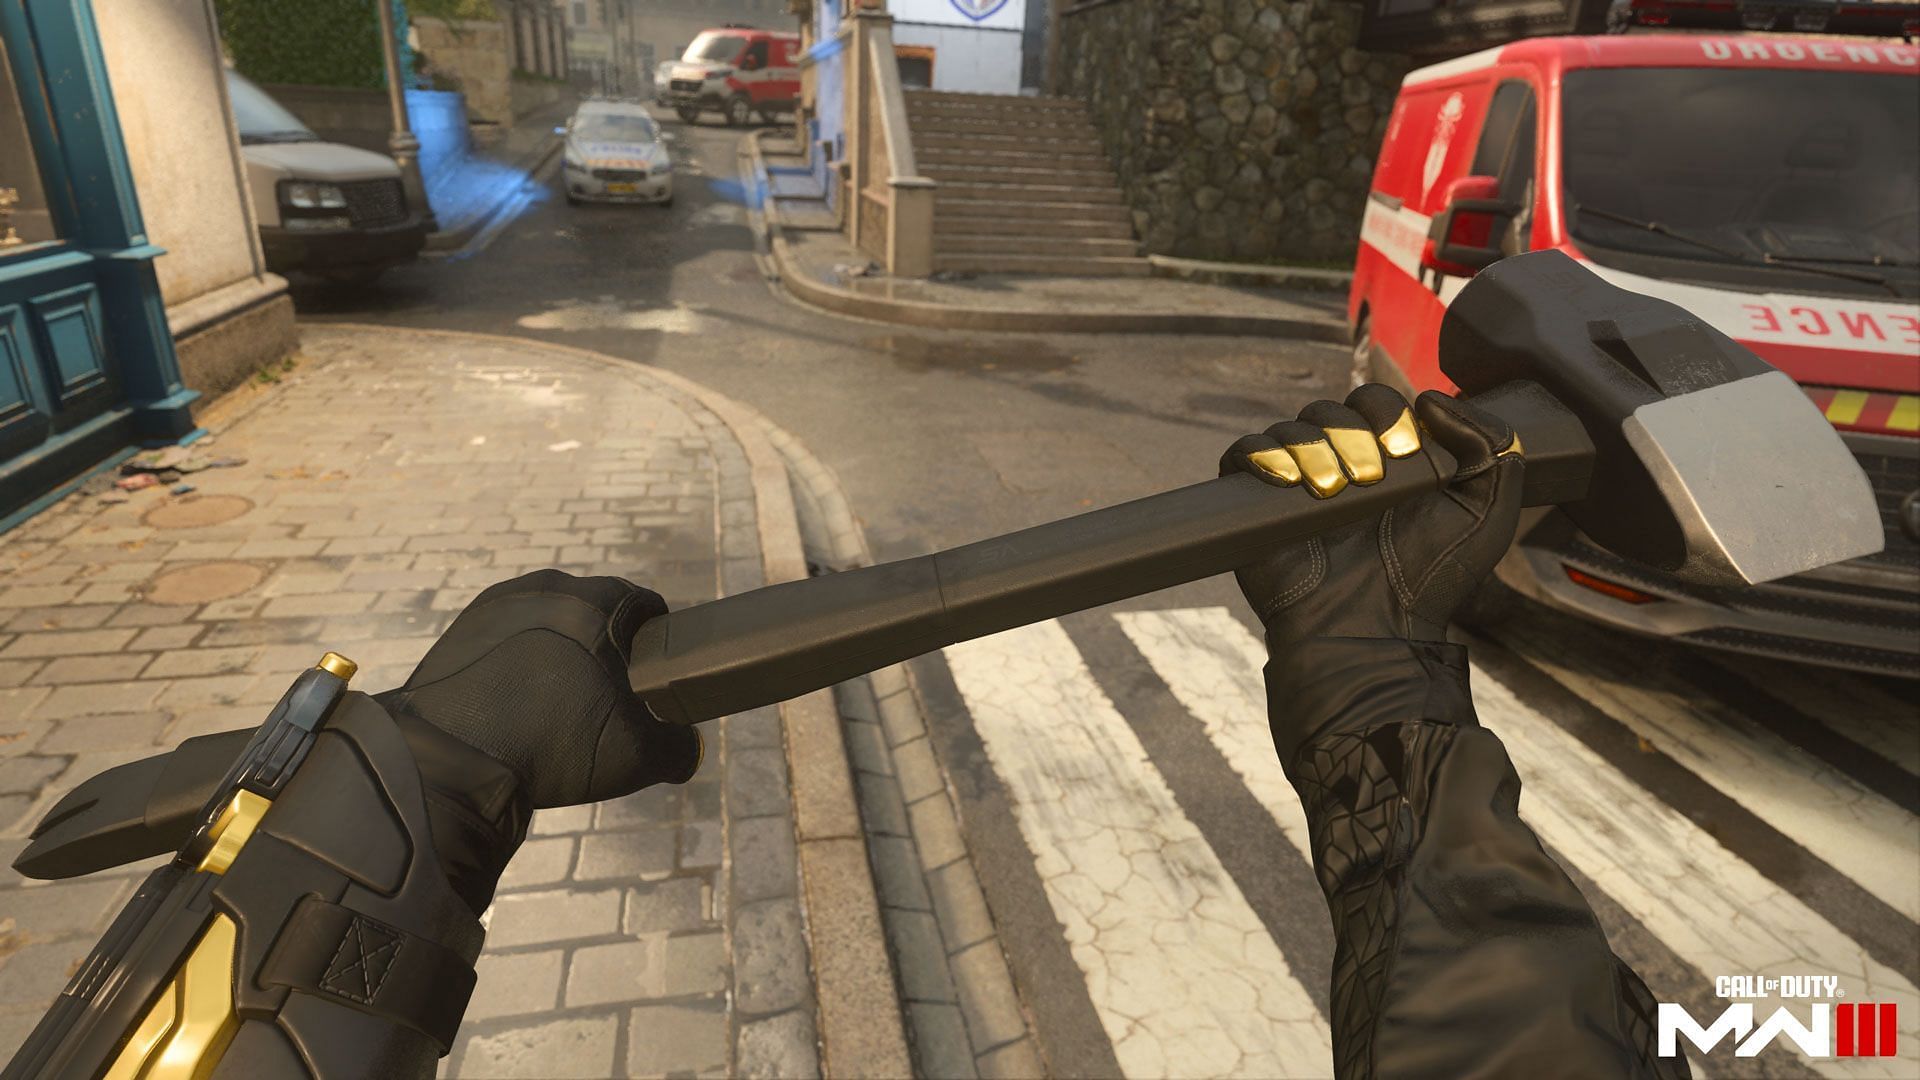 Sledgehammer Melee Weapon in MW3 and Warzone Season 4 Reloaded (Image via Activision)